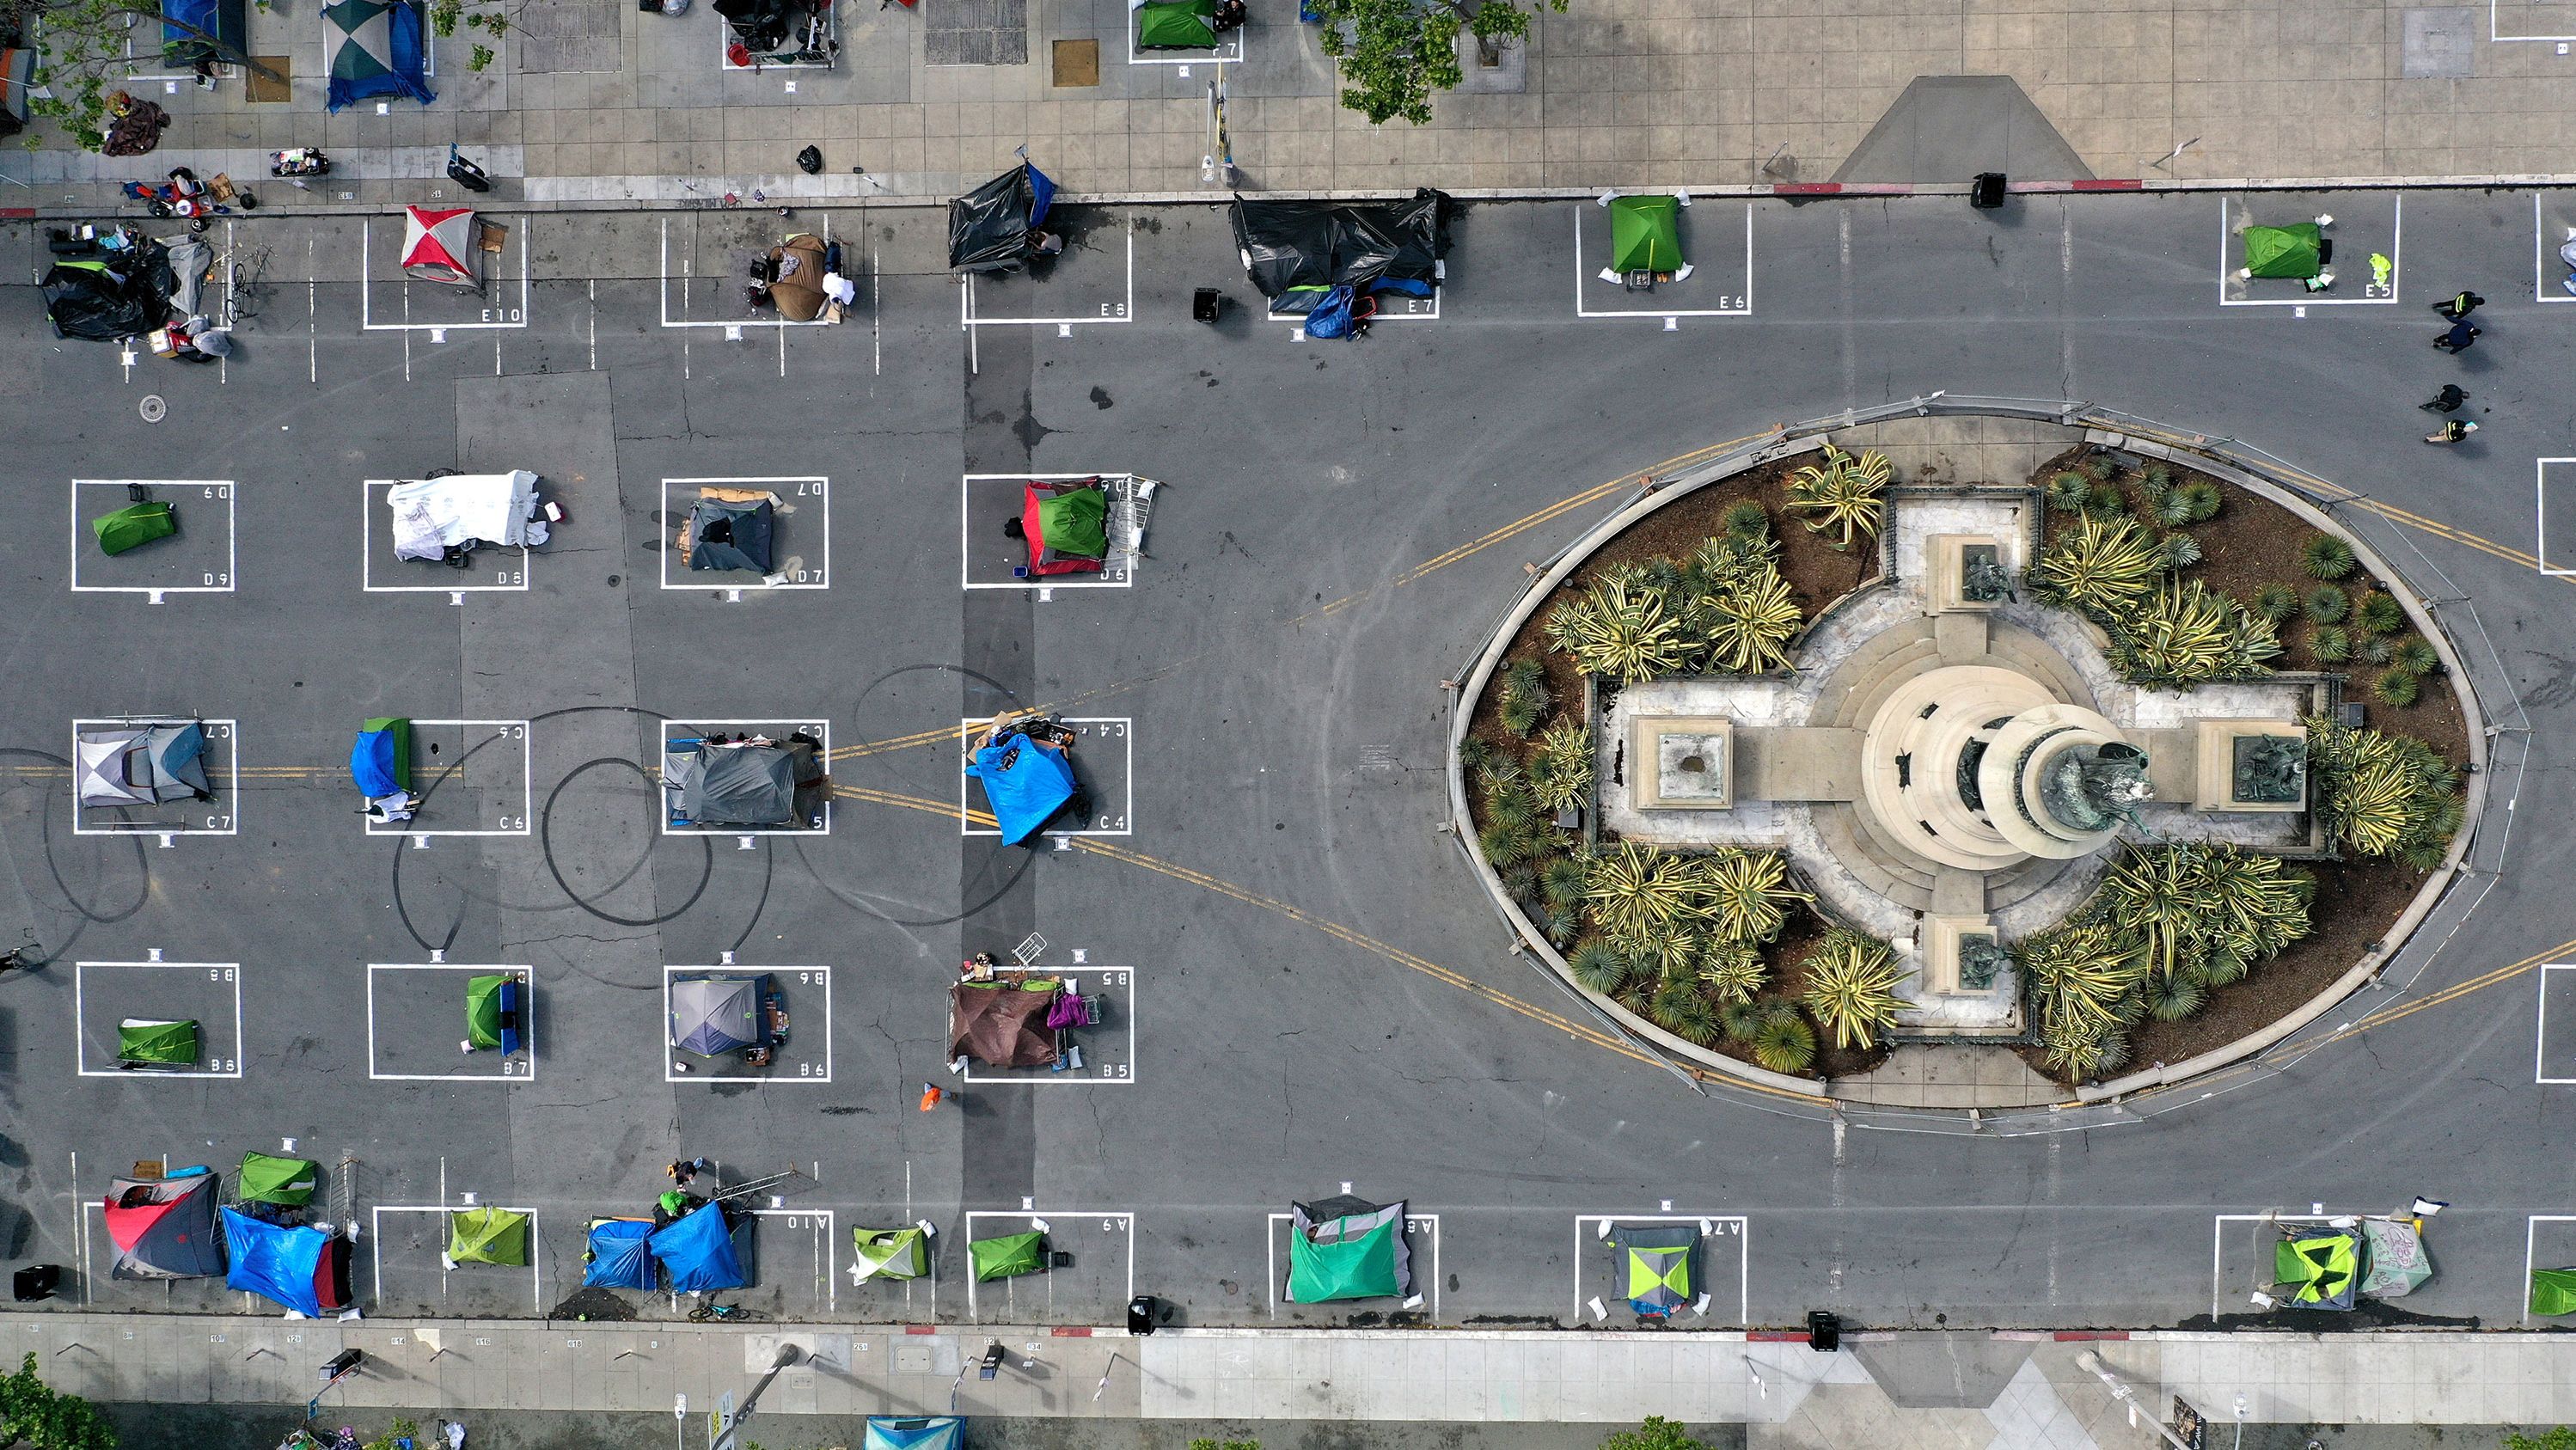 An aerial view of San Francisco's first temporary sanctioned tent encampment for the homeless on May 18, 2020 in San Francisco, California. The camp provides a sleeping area in a fenced-off space near City Hall with marked spots for tents that practice social distancing.